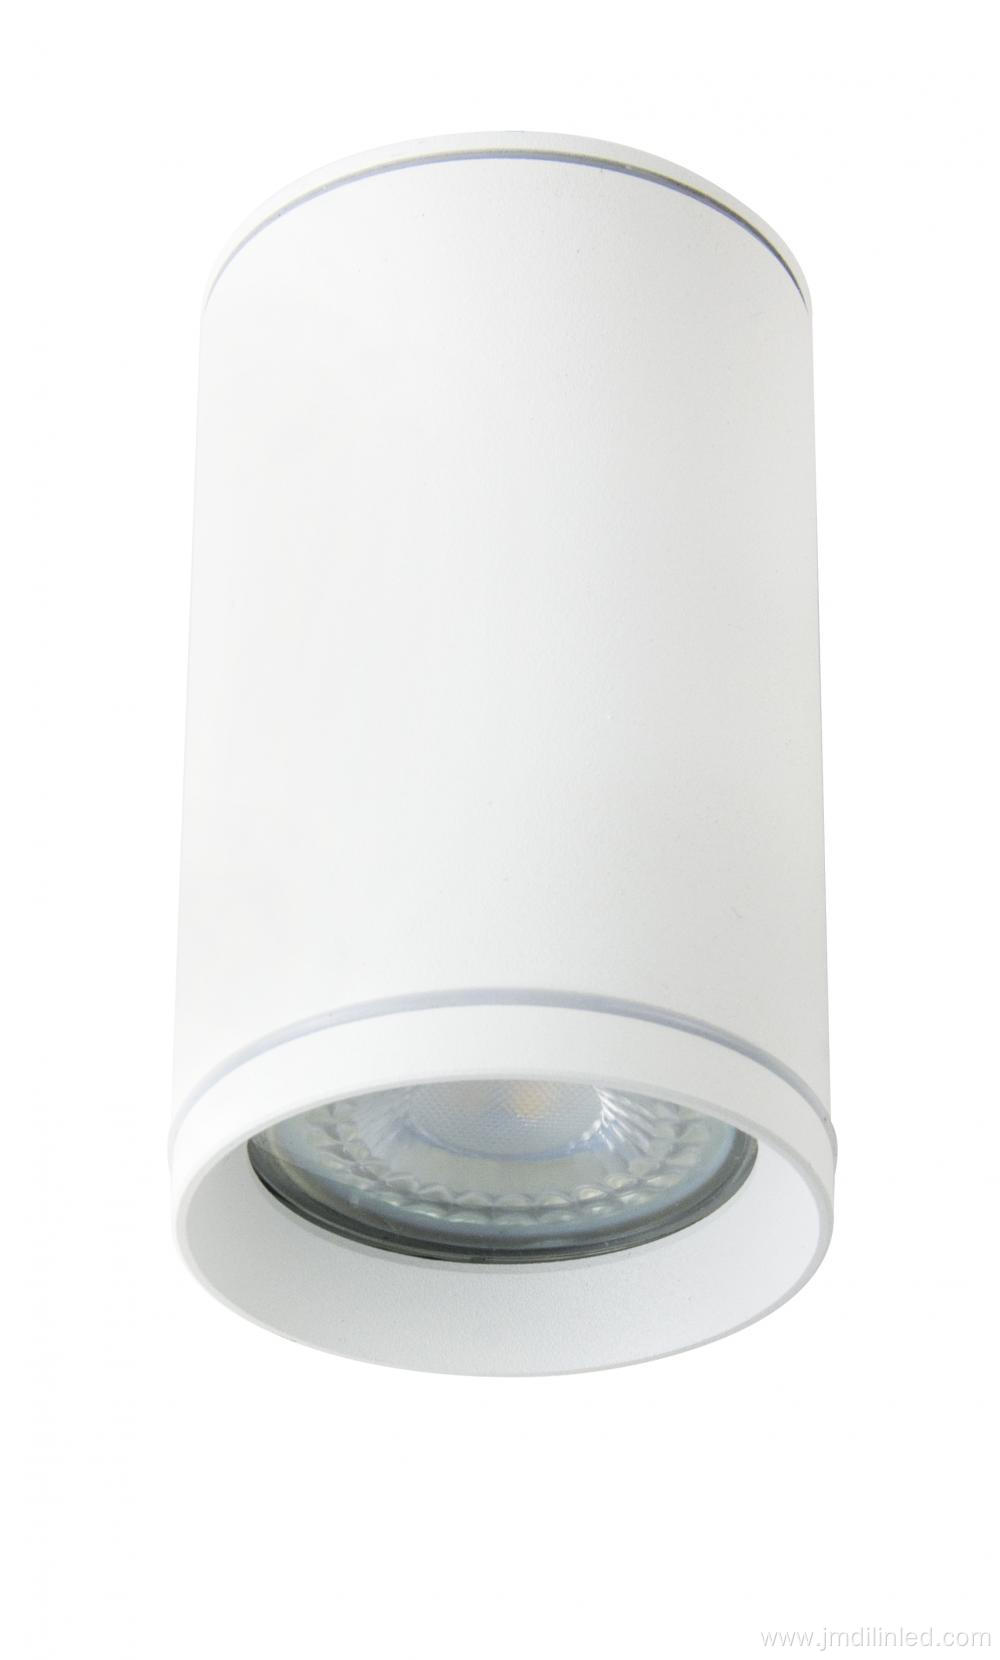 Waterproof surface mounted wall light with GU10 holder